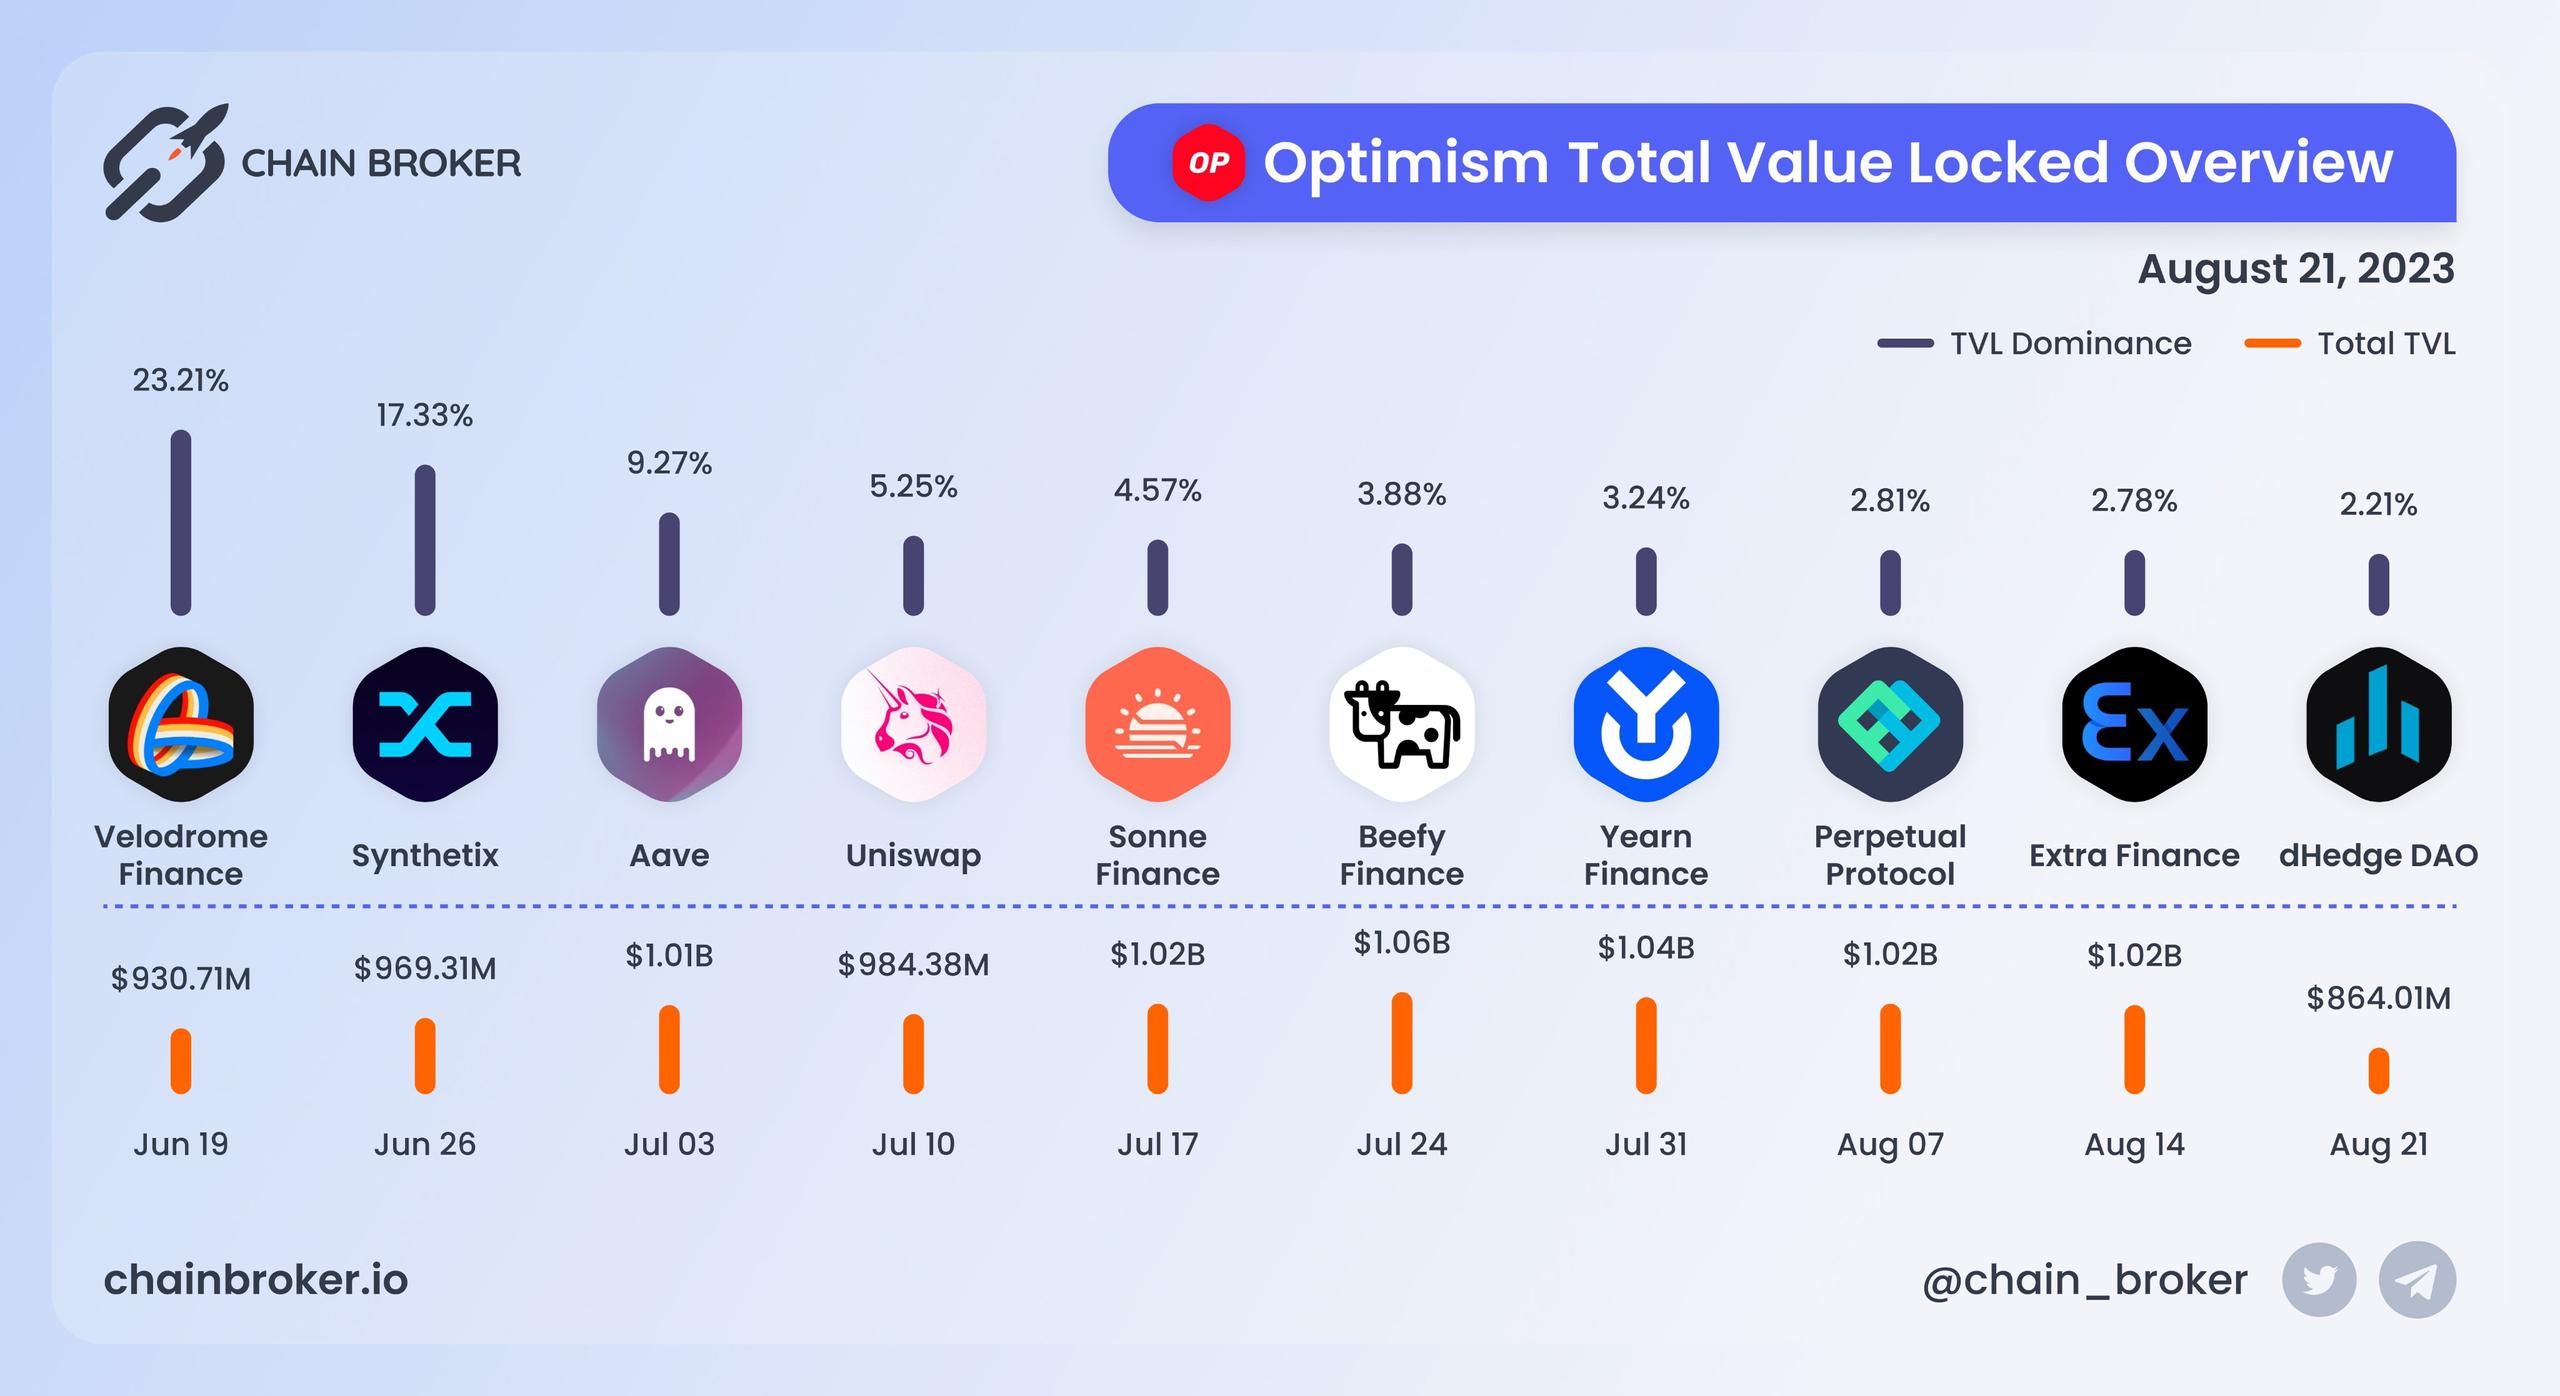 Optimism total value locked overview